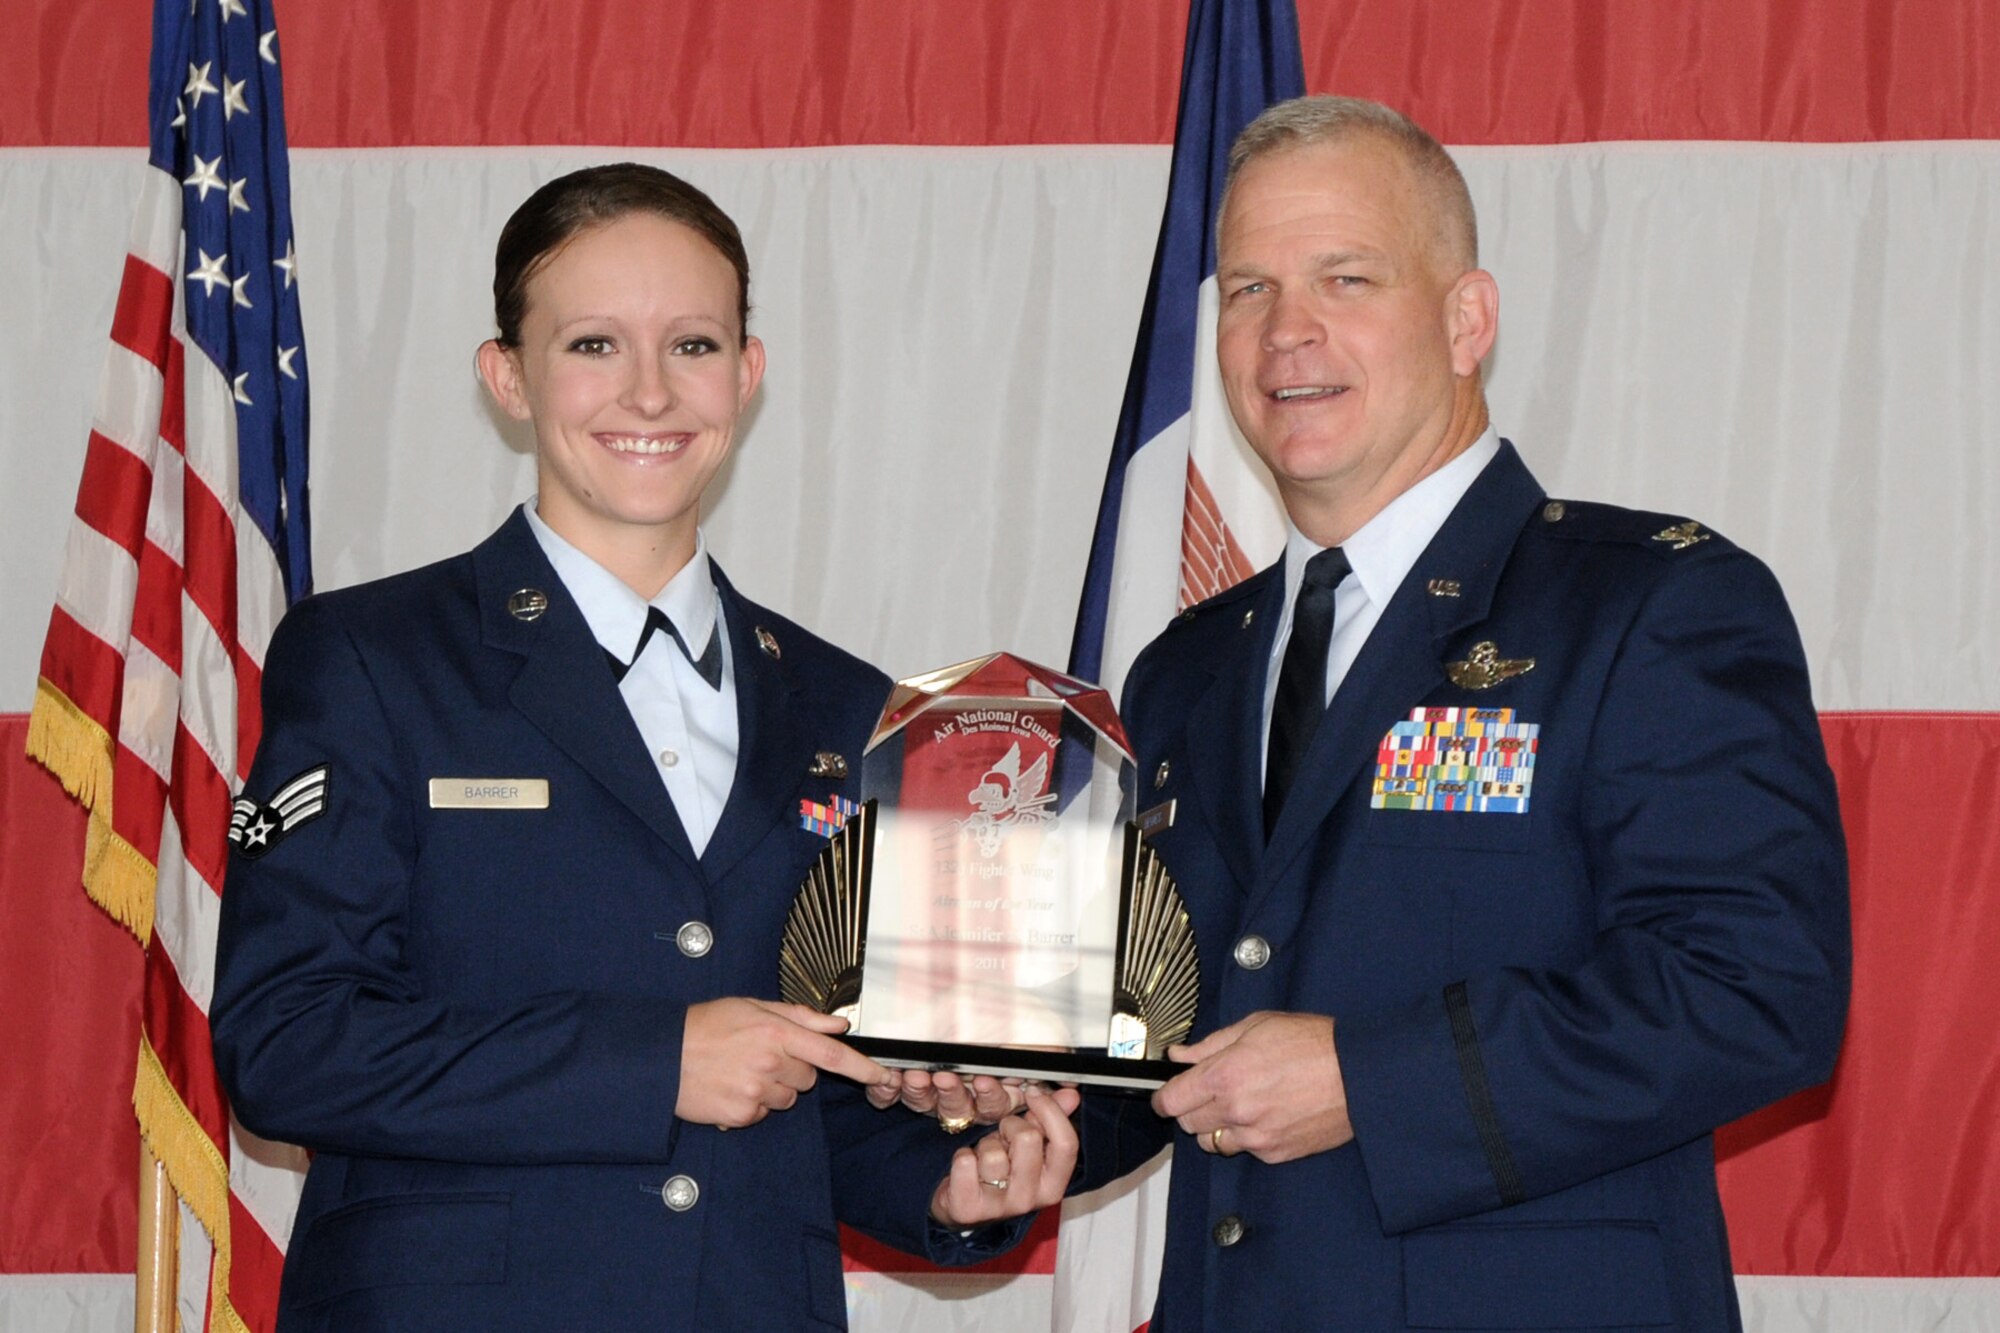 Col. Drew DeHaes (right) presents Senior Airman Jennifer Barrer (left) with the 2011 Airman of the Year award during the Awards Ceremony held in the hangar of the 132nd Fighter Wing, Des Moines, Iowa on November 6, 2011.  (US Air Force photo/Staff Sgt. Linda E. Kephart)(Released)